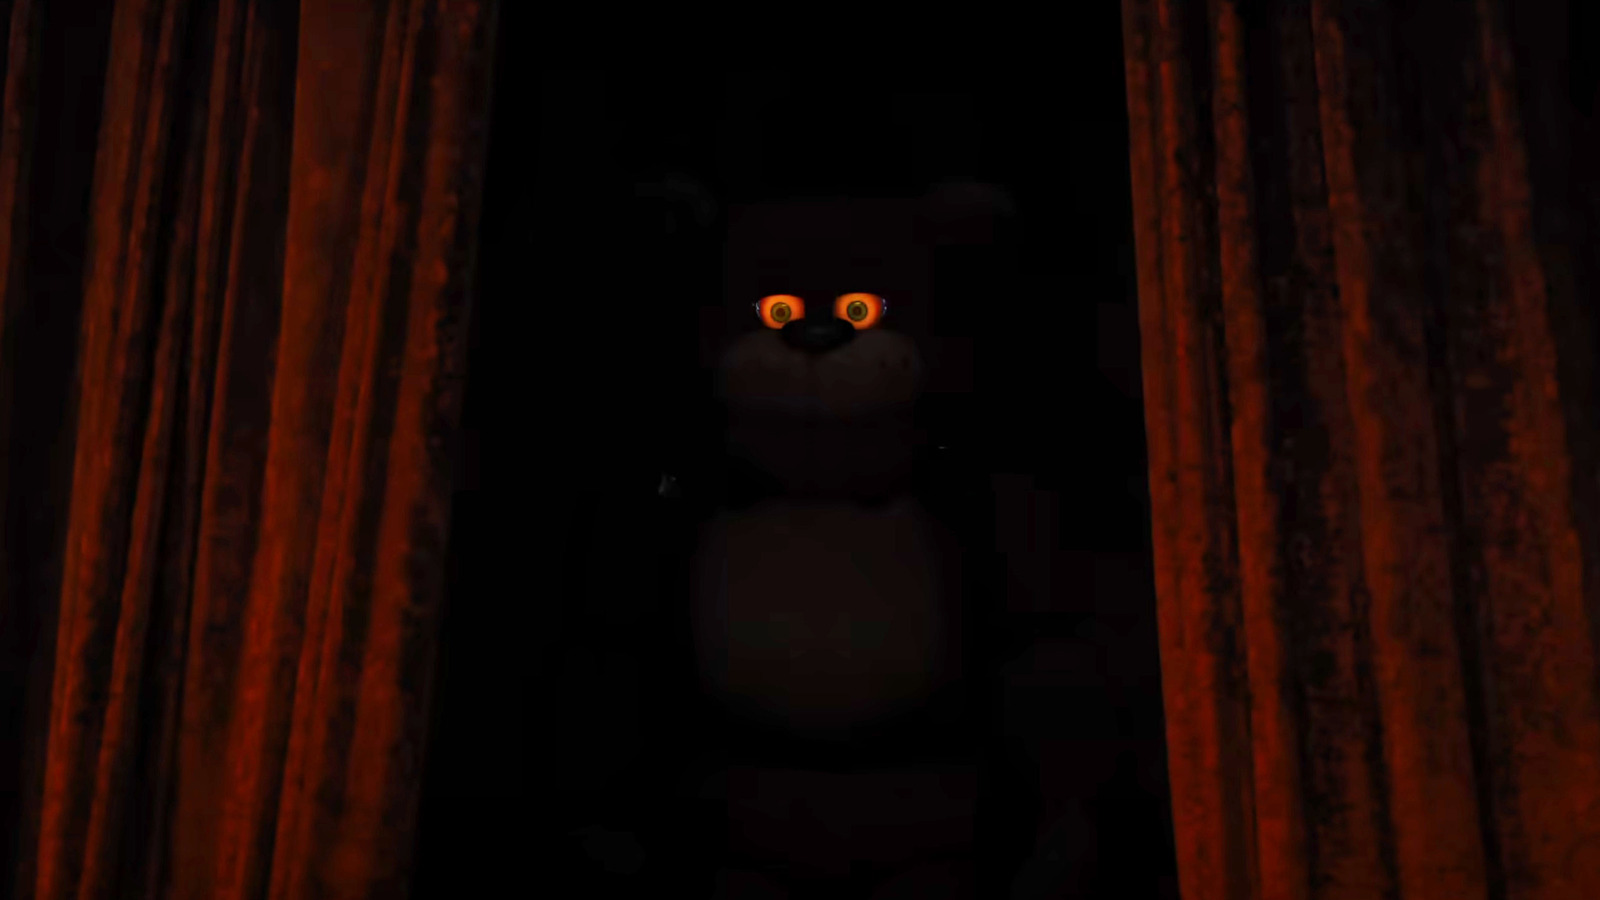 Five Nights At Freddy's Glowing Eyes Poster